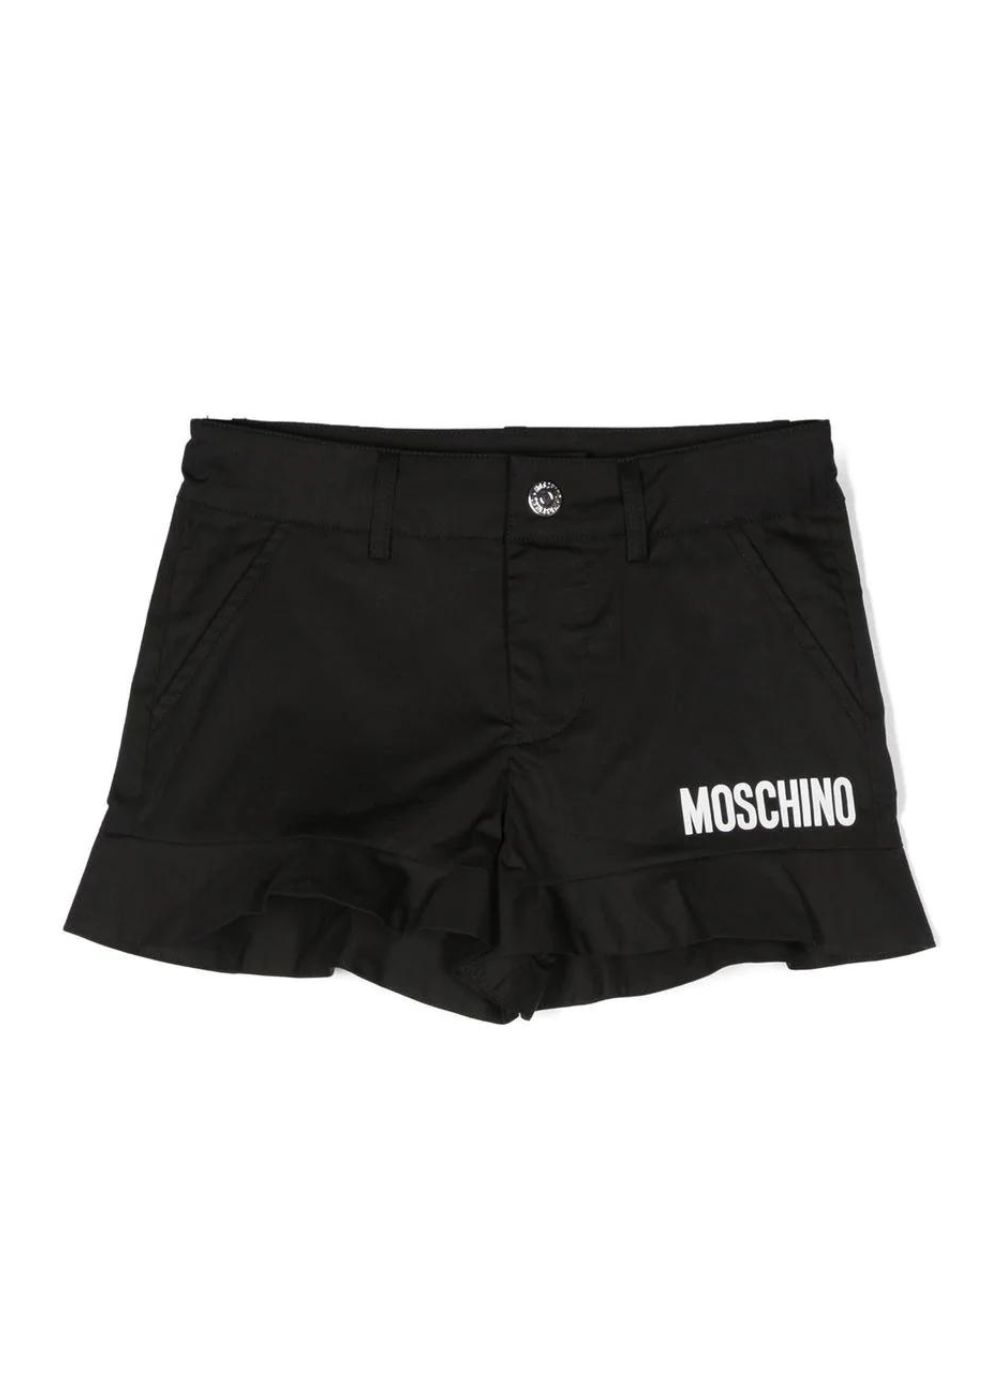 Featured image for “Moschino Lightweight shorts”